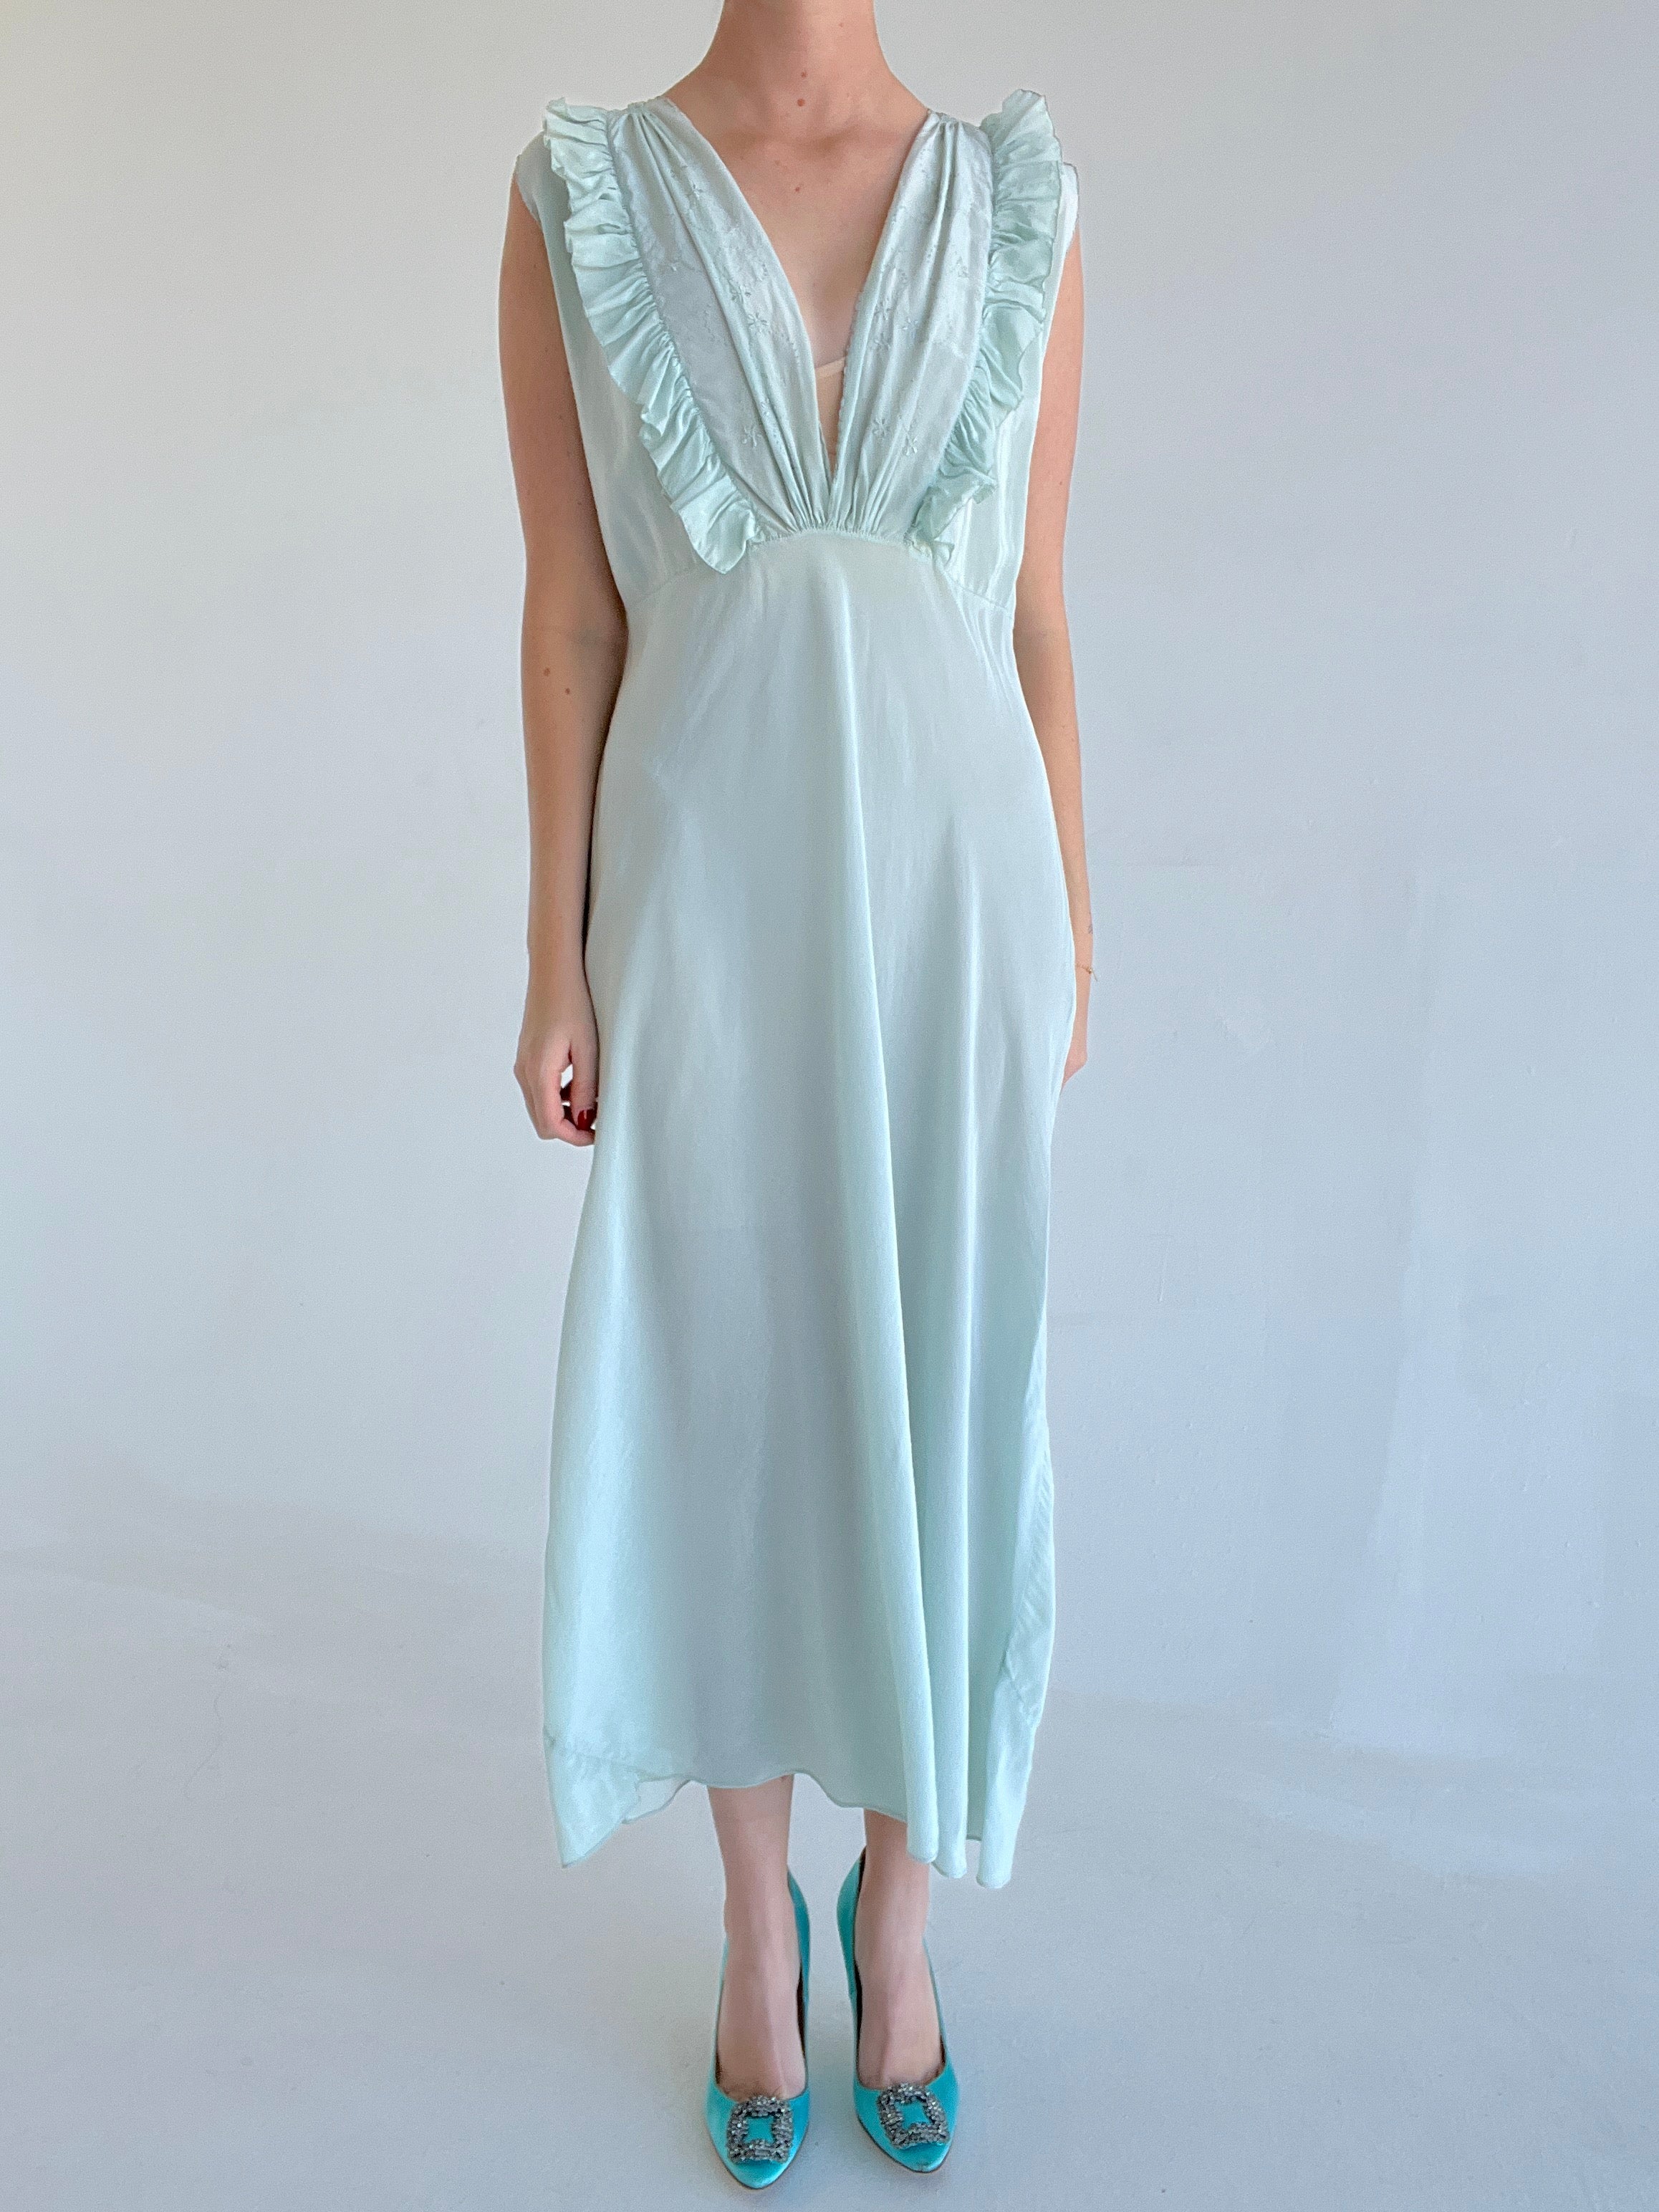 1930's Pale Turquoise Silk Dress with Ruffle and Embroidery